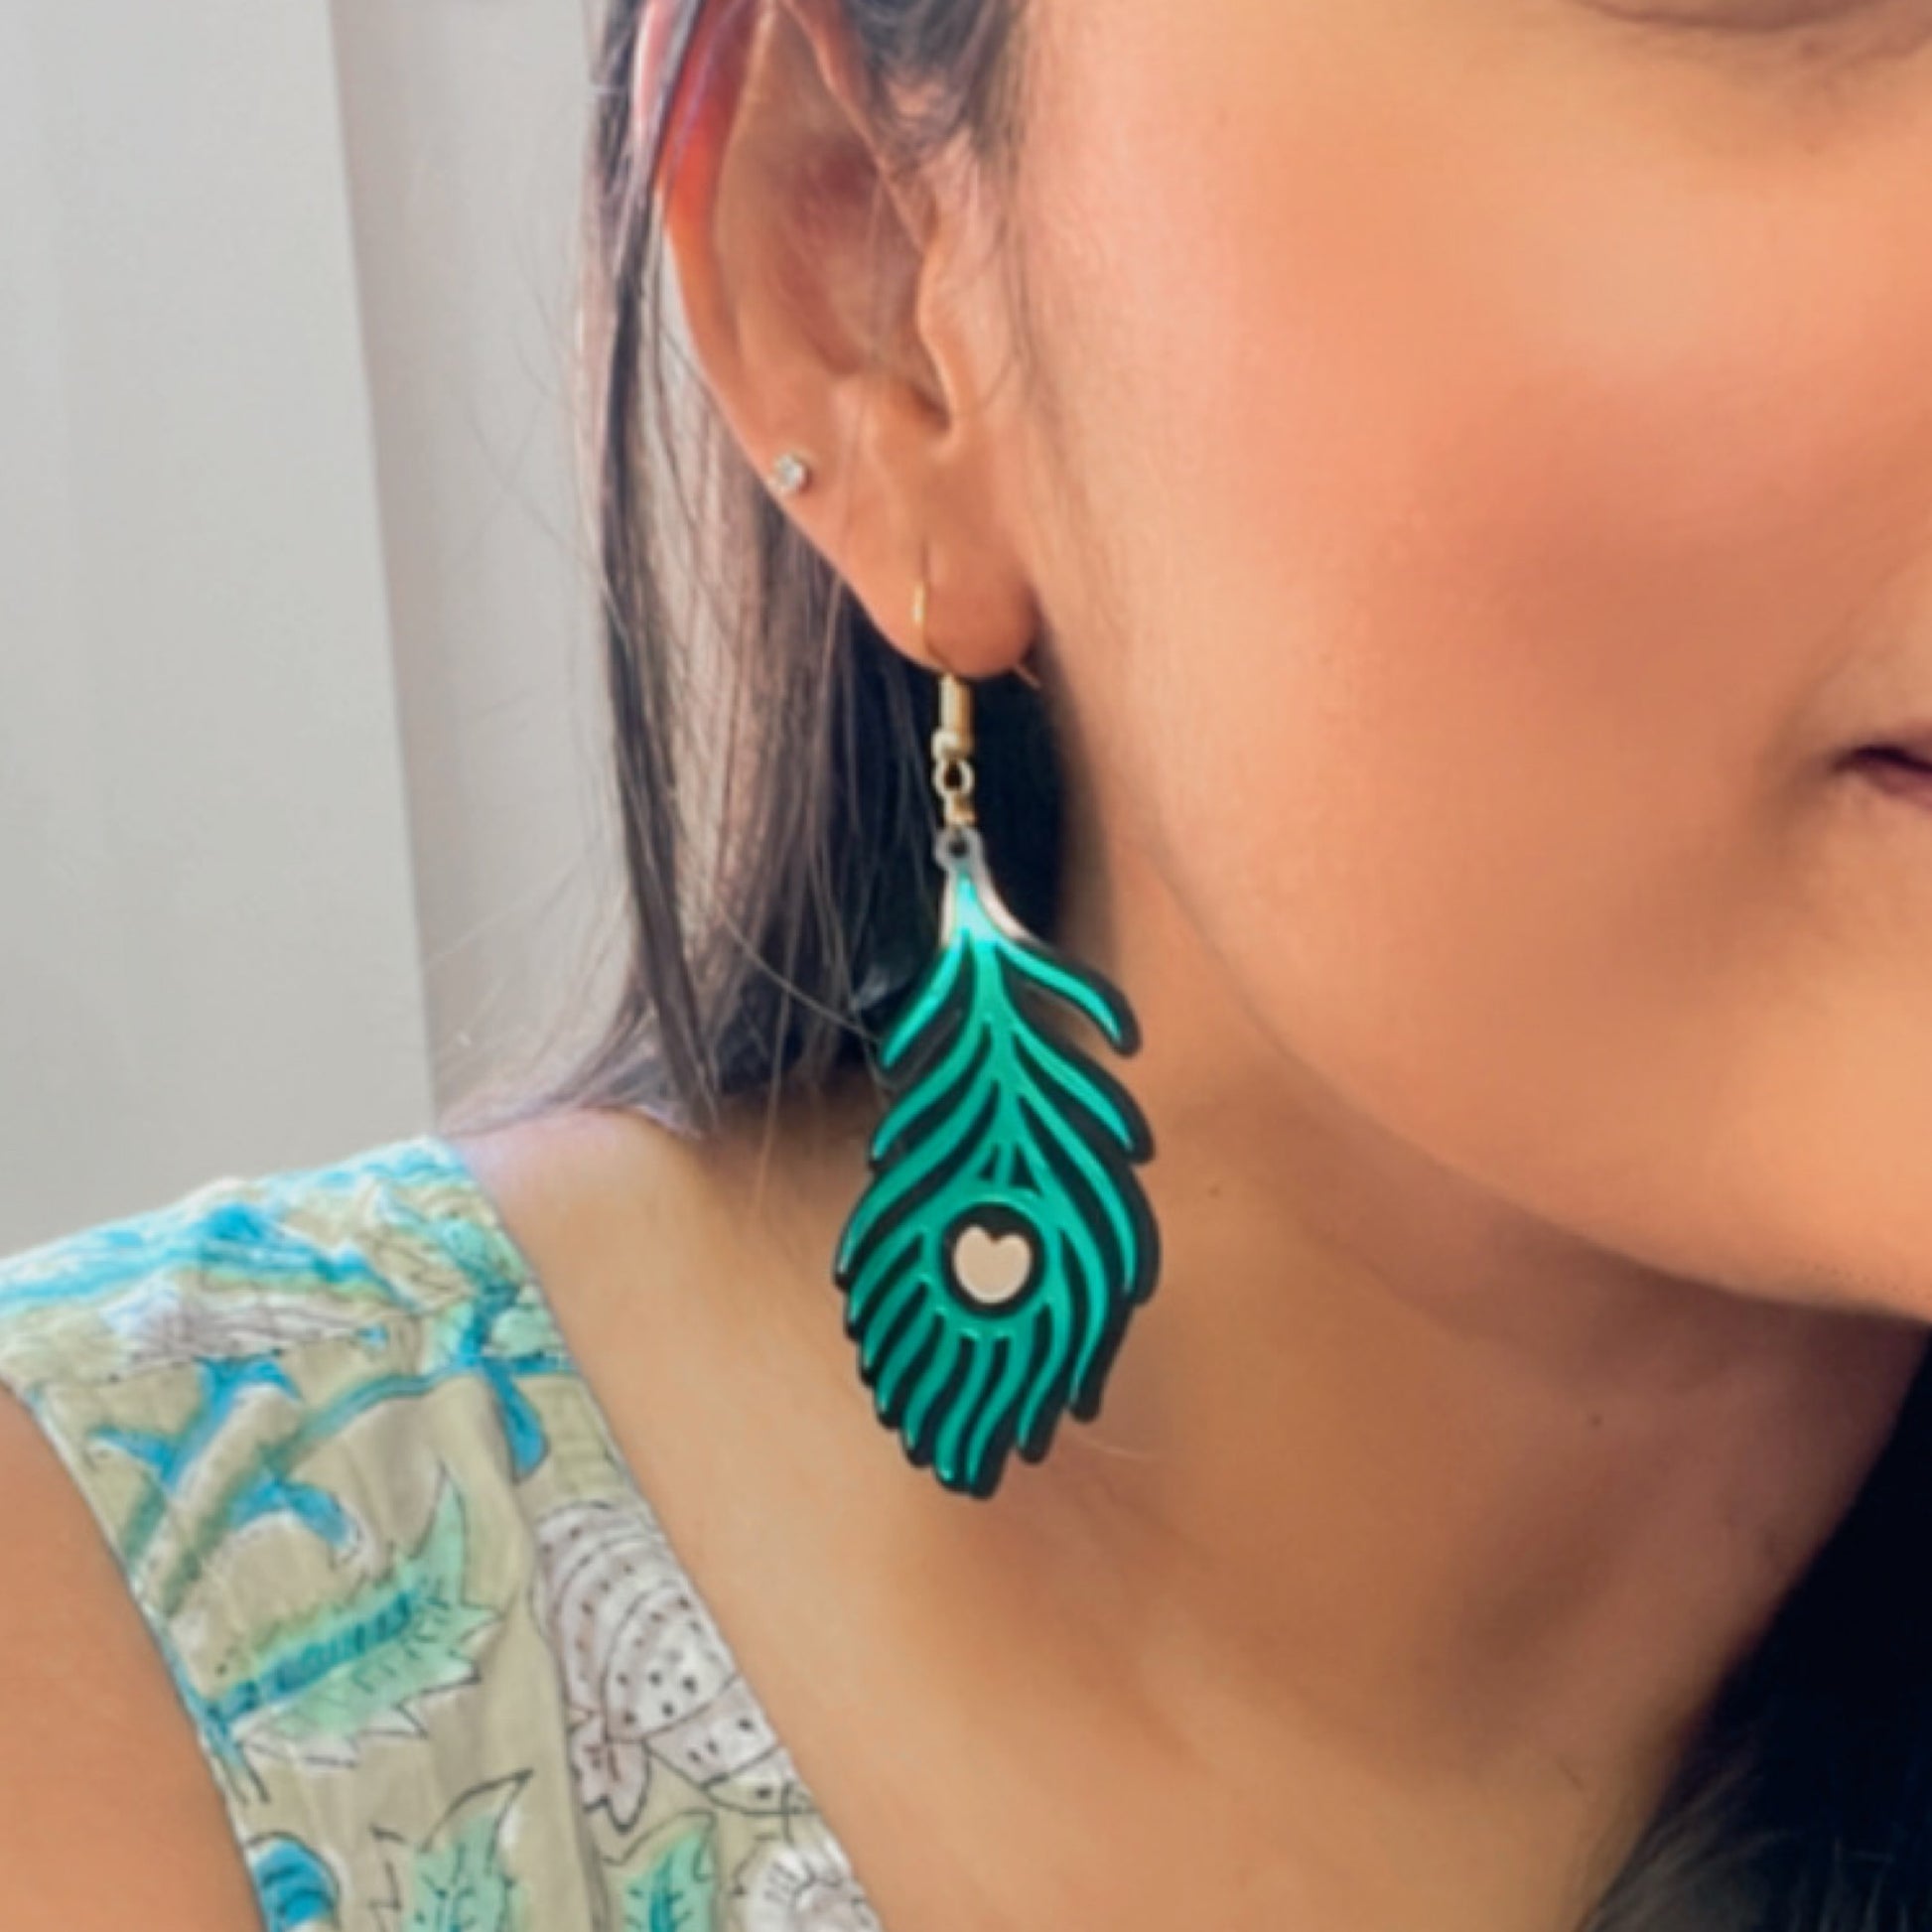 Morpankh Danglers - Glossy Green with Black and Golden details - Nian by Nidhi - worn by a woman